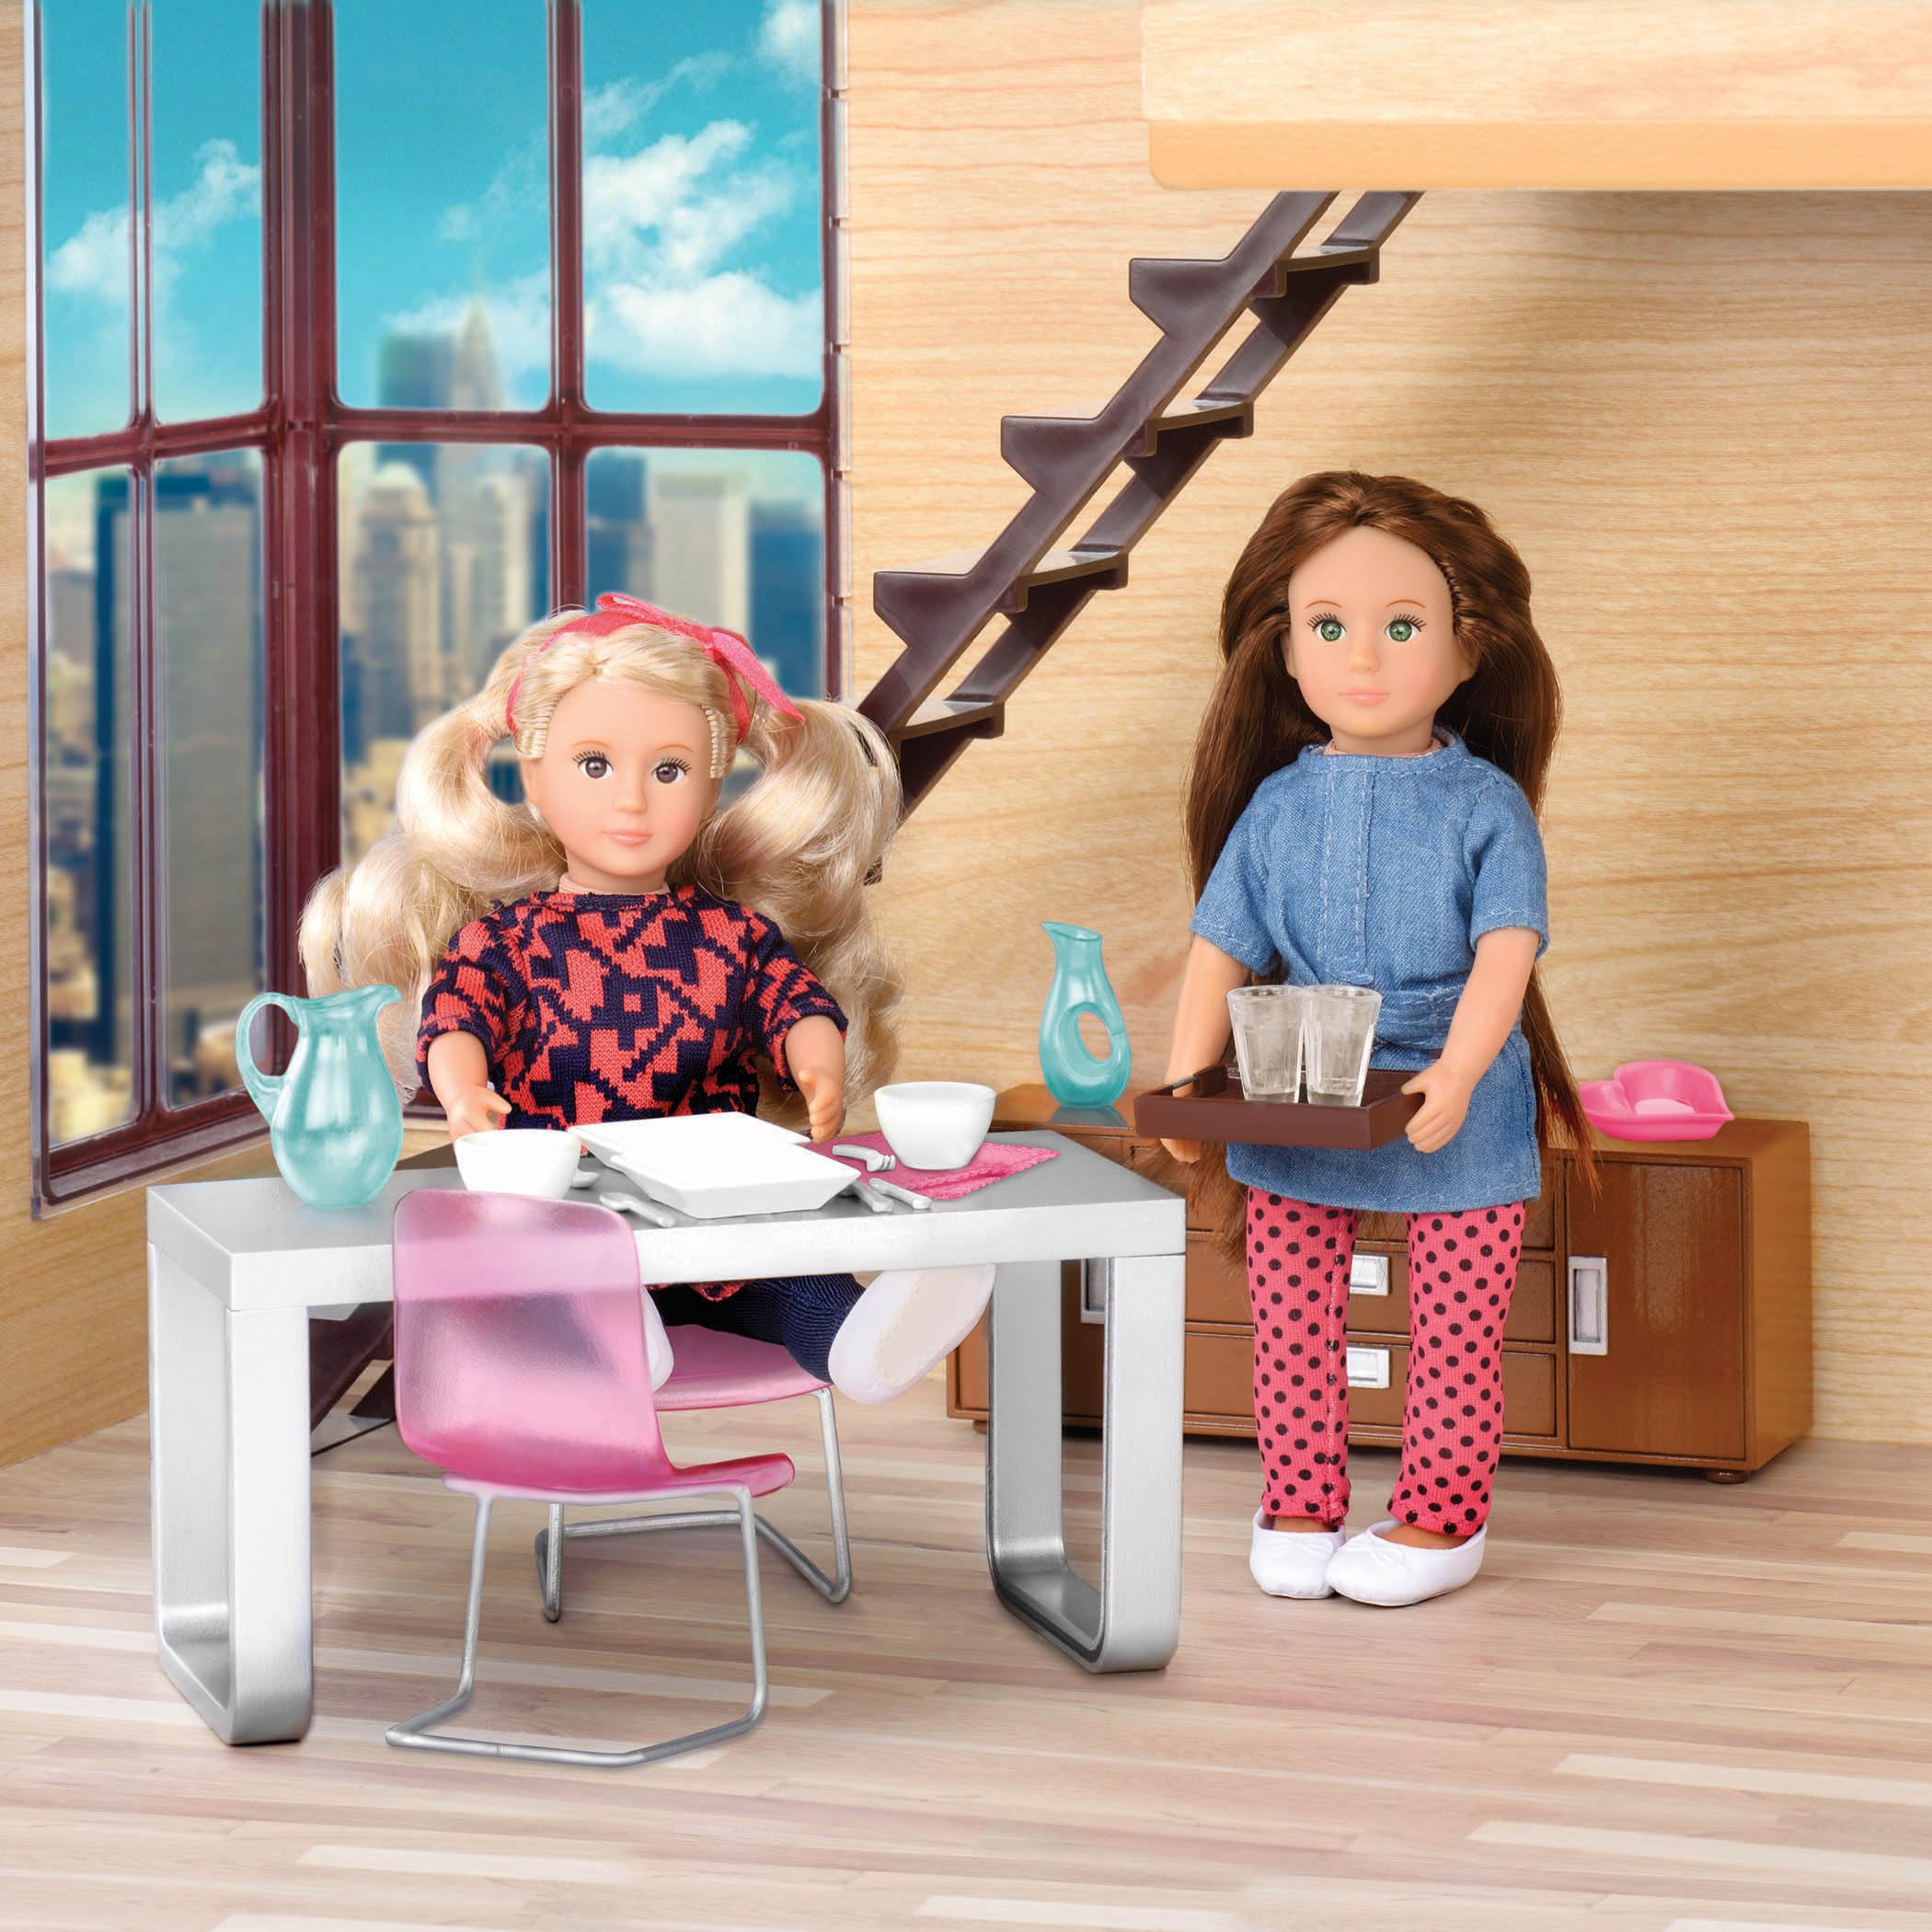 Lori – Dining Room Set for Mini Dolls – Dollhouse Furniture for 6-inch Dolls – Table, Chairs, Accessories – Toys for Kids – 3 Years + – Moderna Dining Set